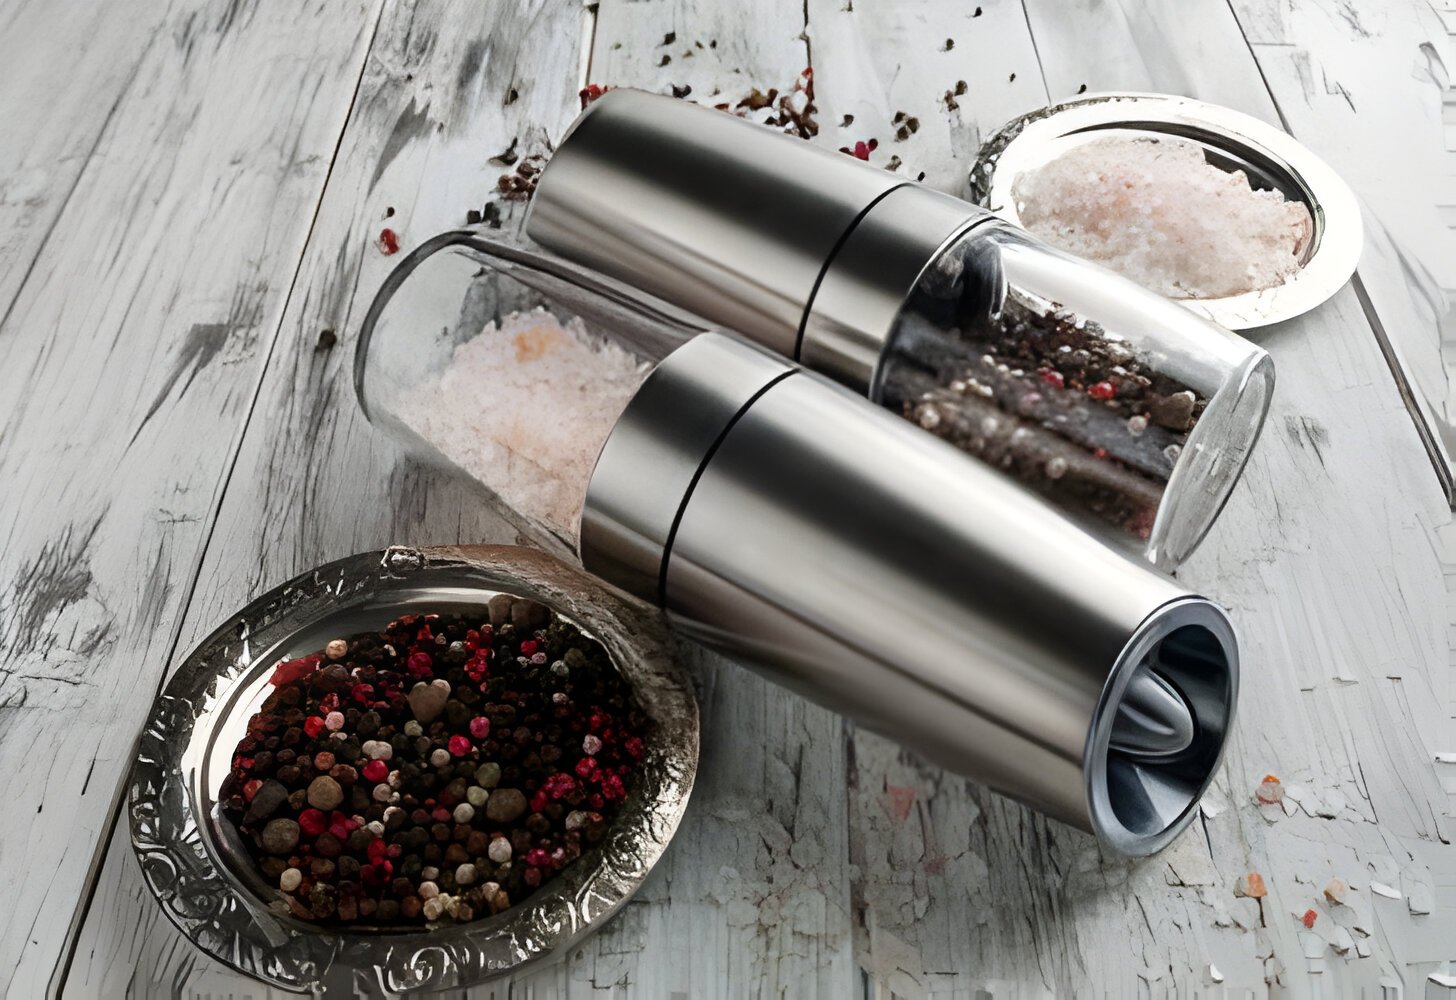 Top 10 Electric Salt and Pepper Grinders for Your Kitchen